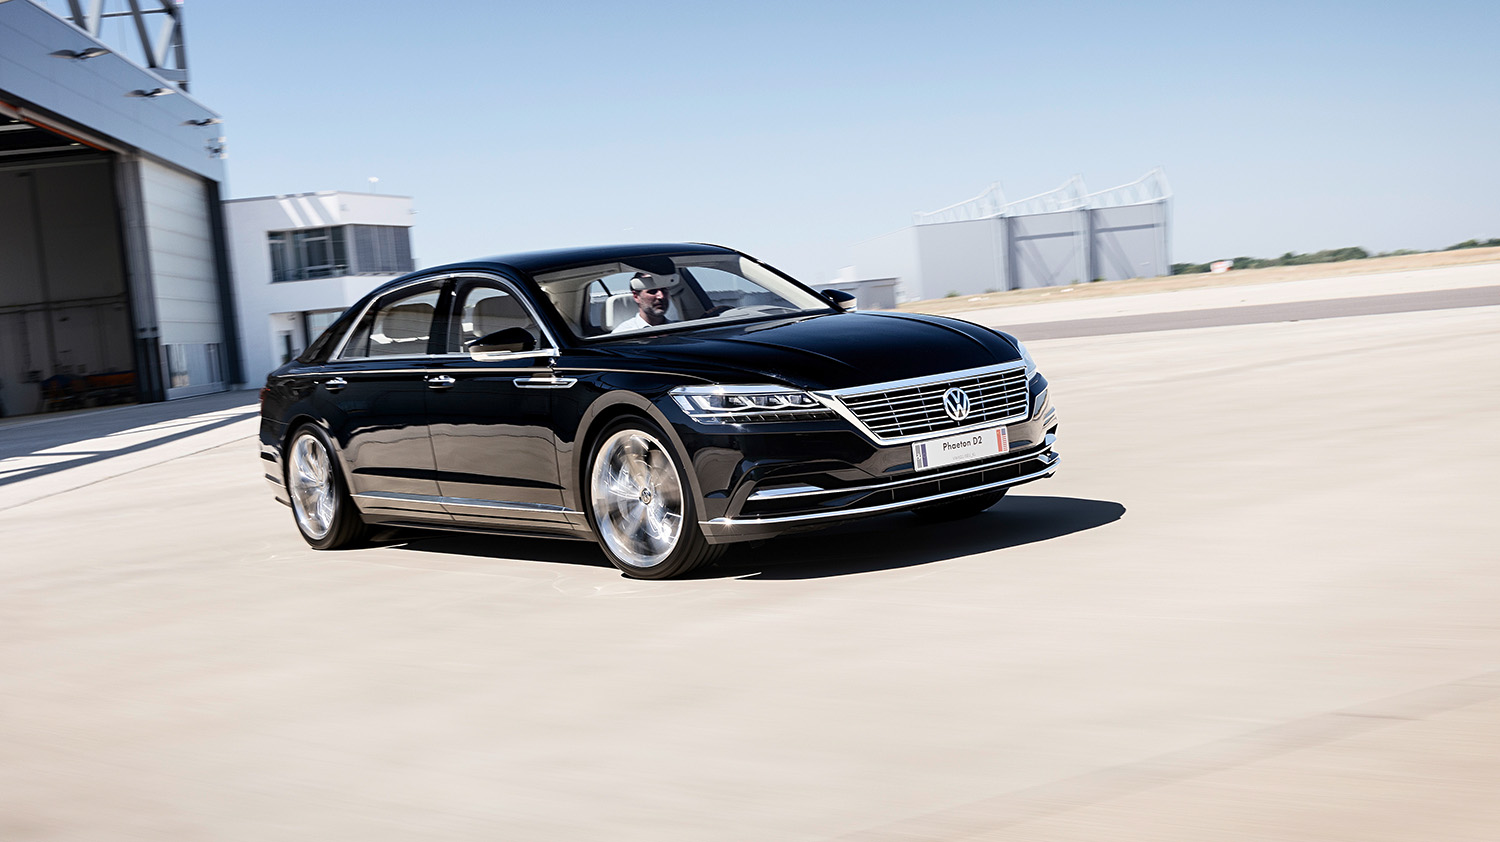 Volkswagen Phaeton prototype driving at airport could have been 2023 model